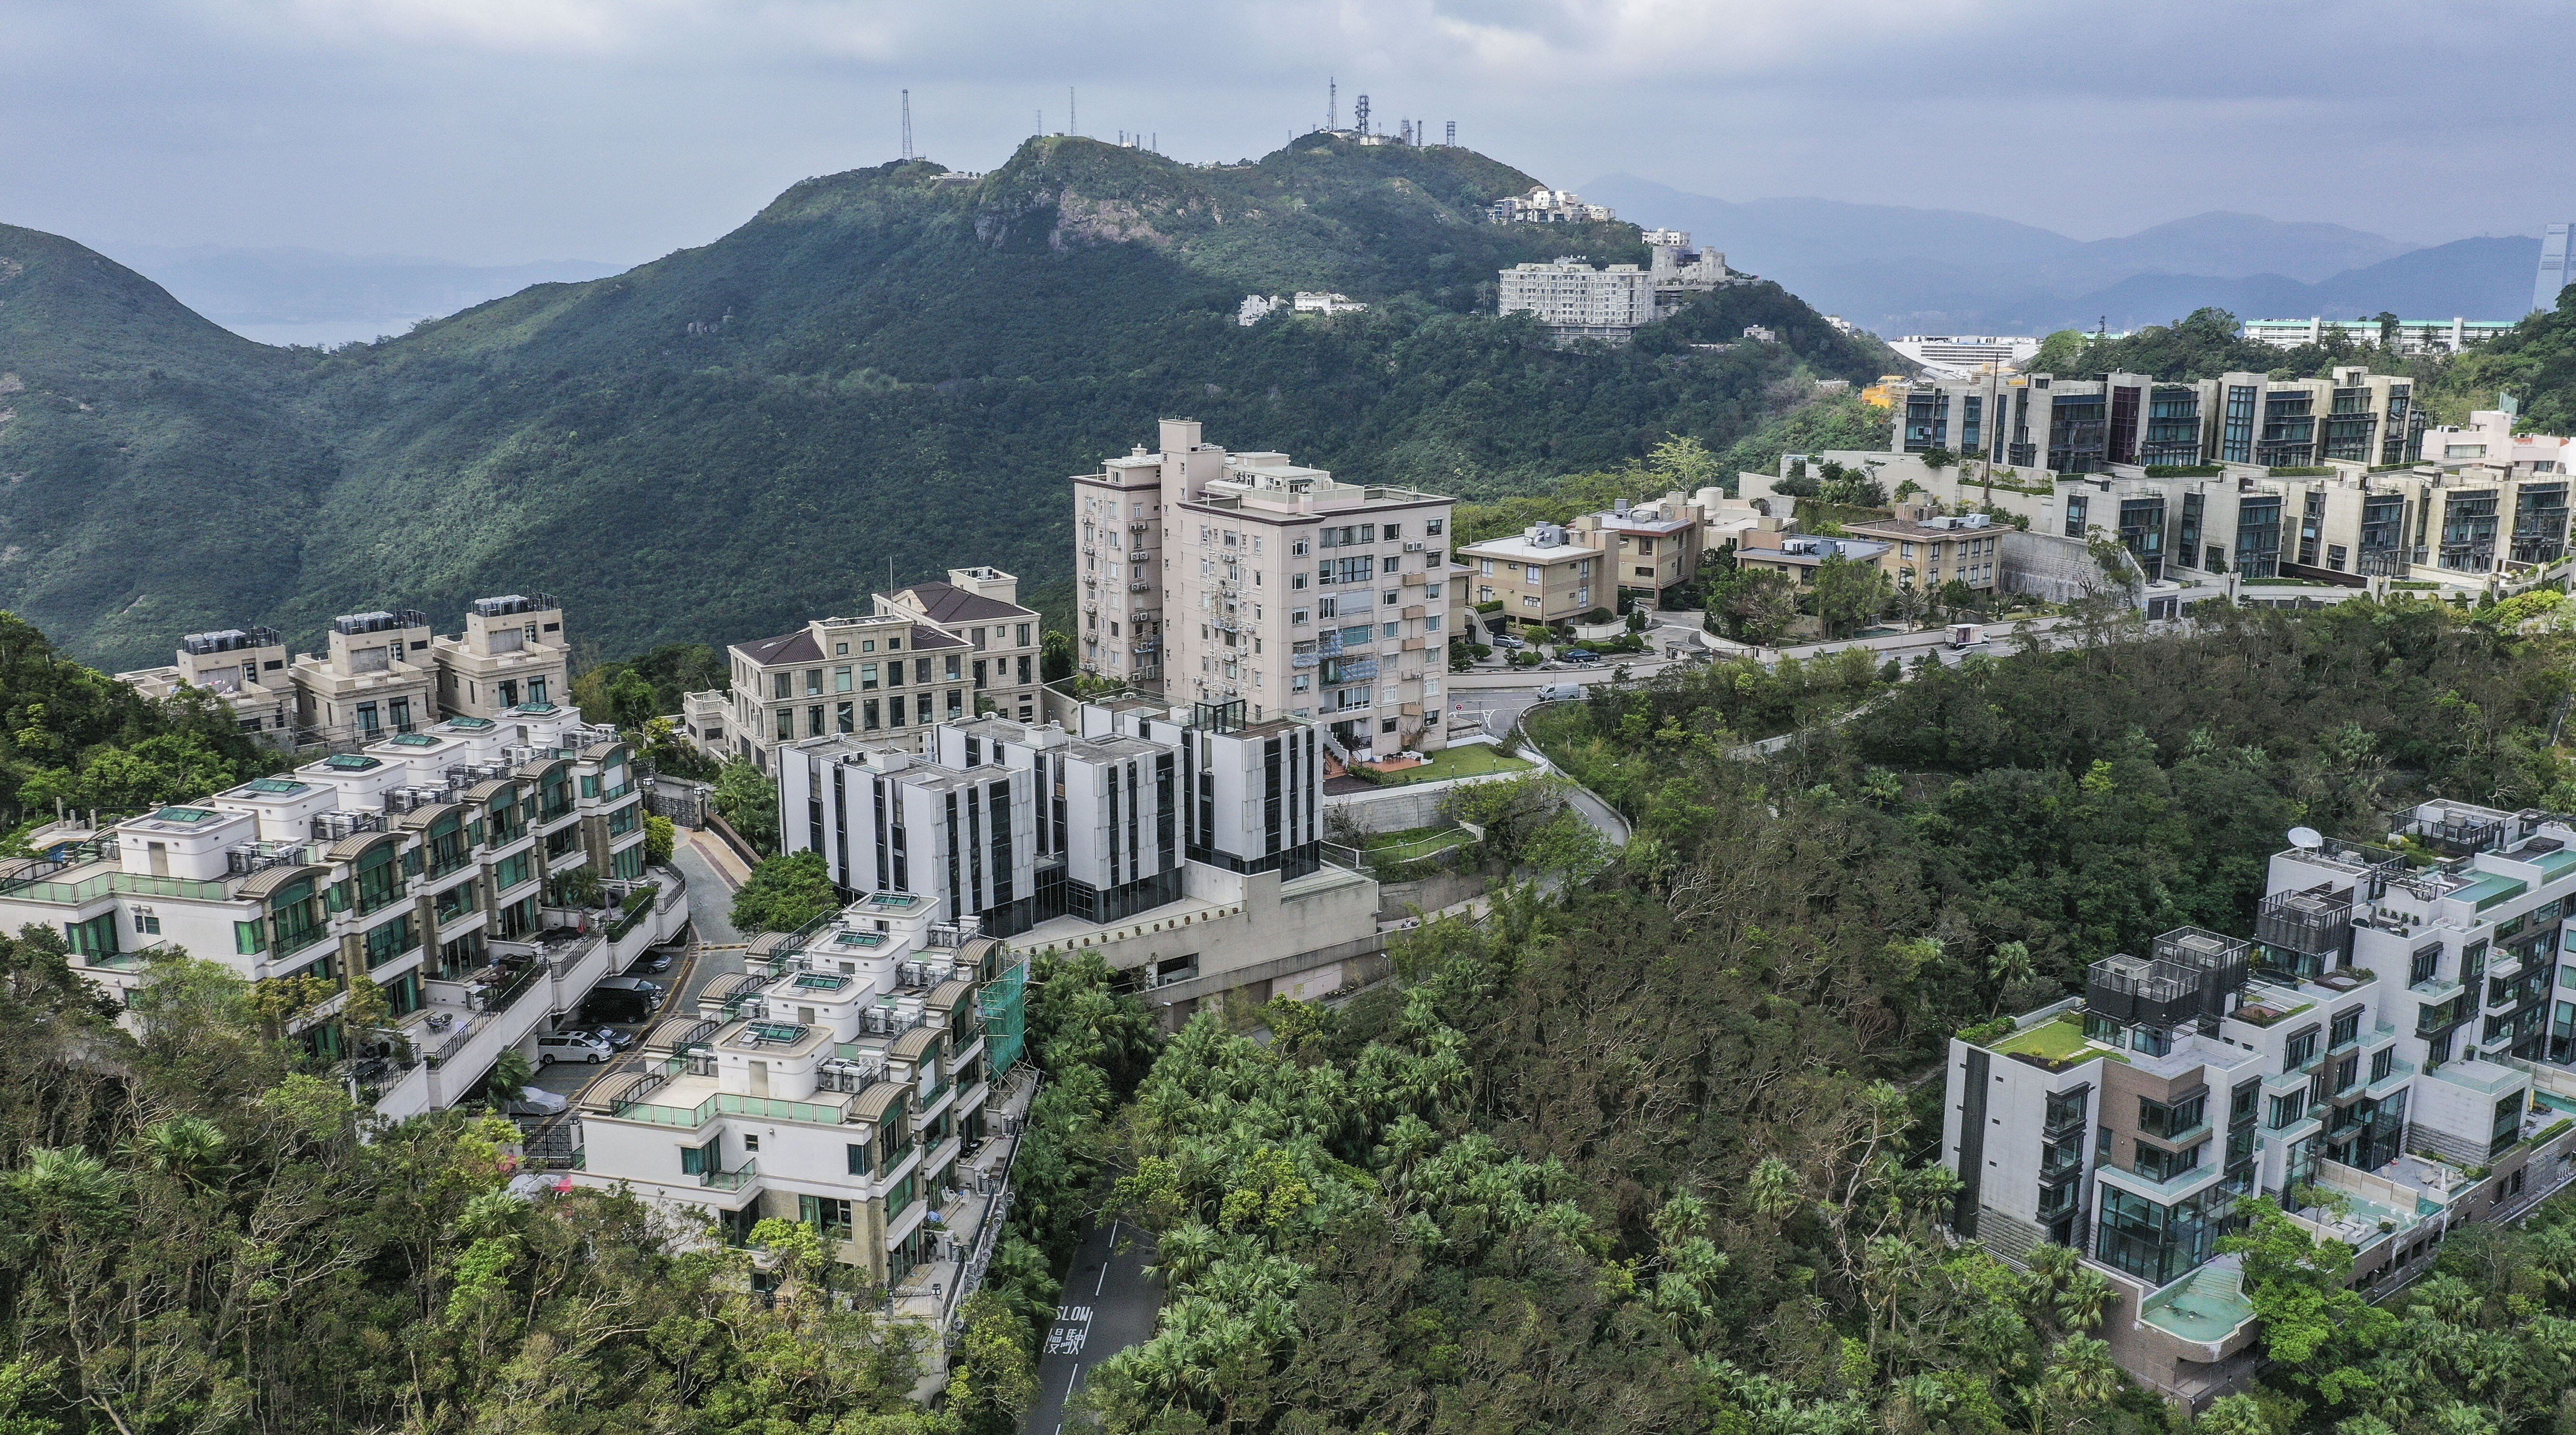 Luxury apartments and residential buildings on The Peak. Photo: Roy Issa